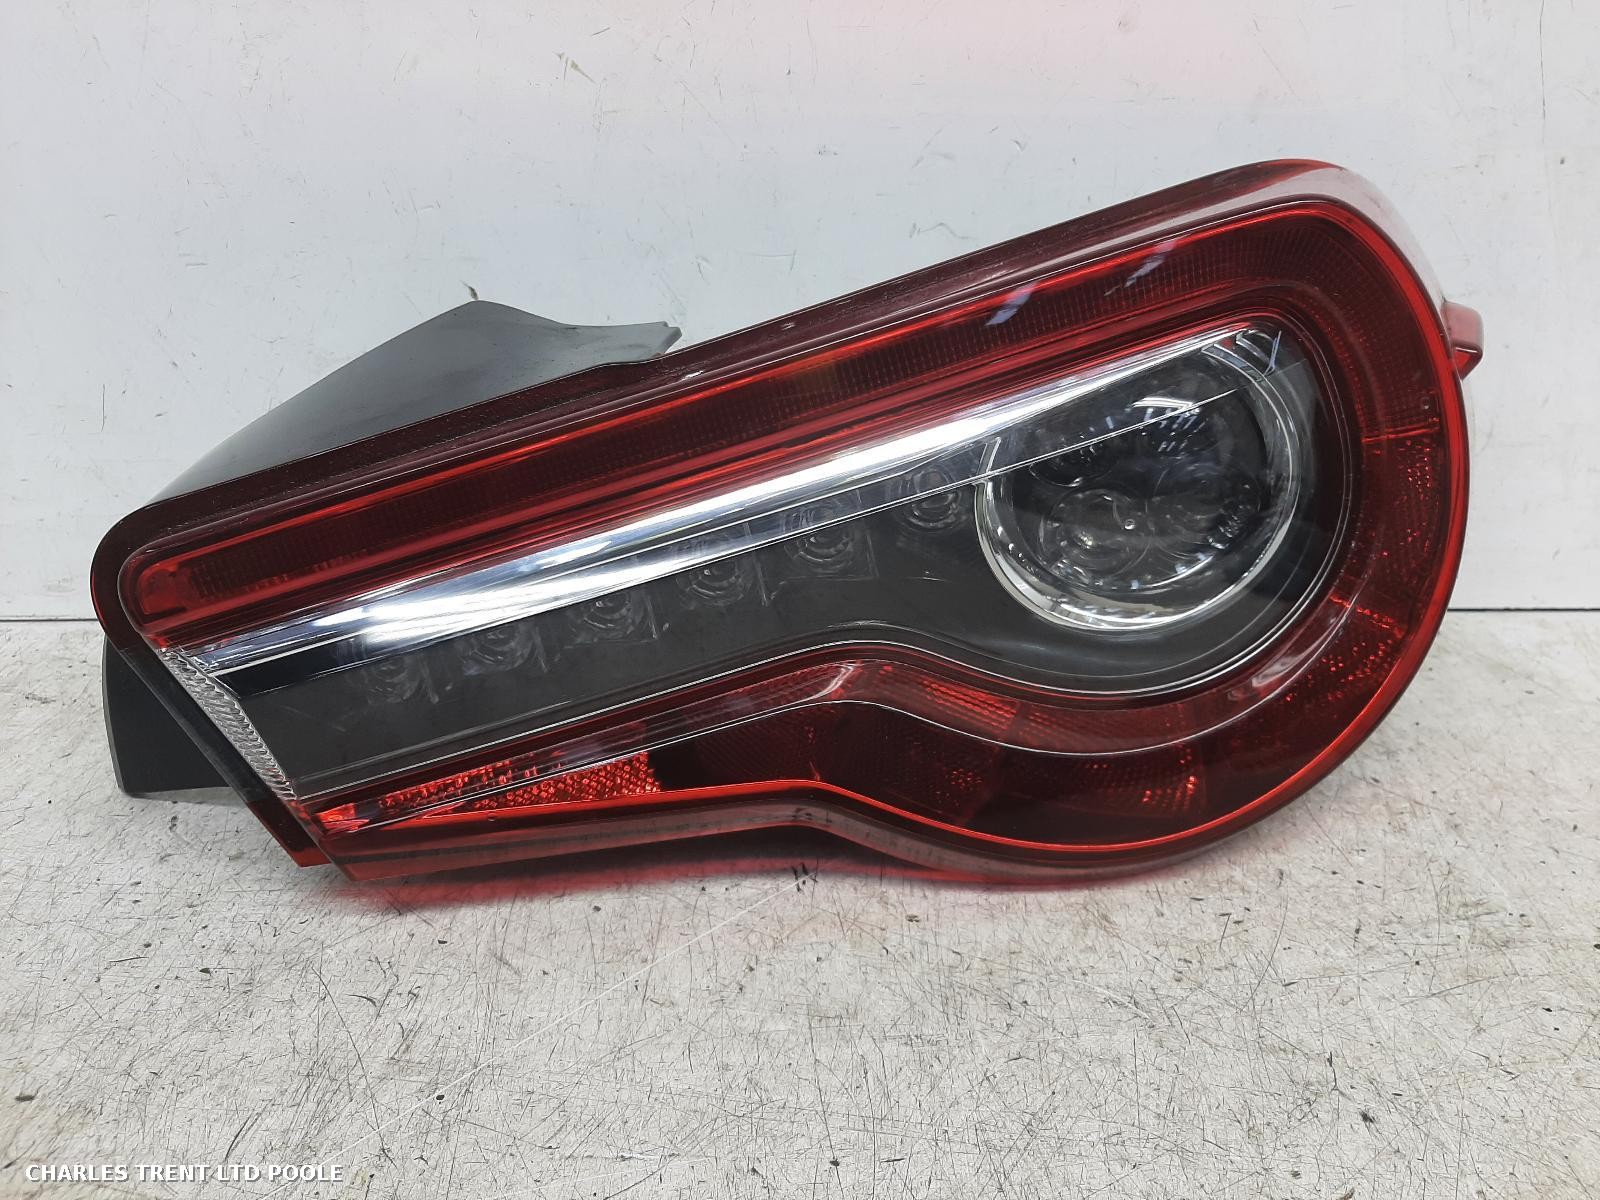 2020 - TOYOTA - GT86 - TAIL LIGHT / REAR LIGHT (RIGHT / DRIVER SIDE)